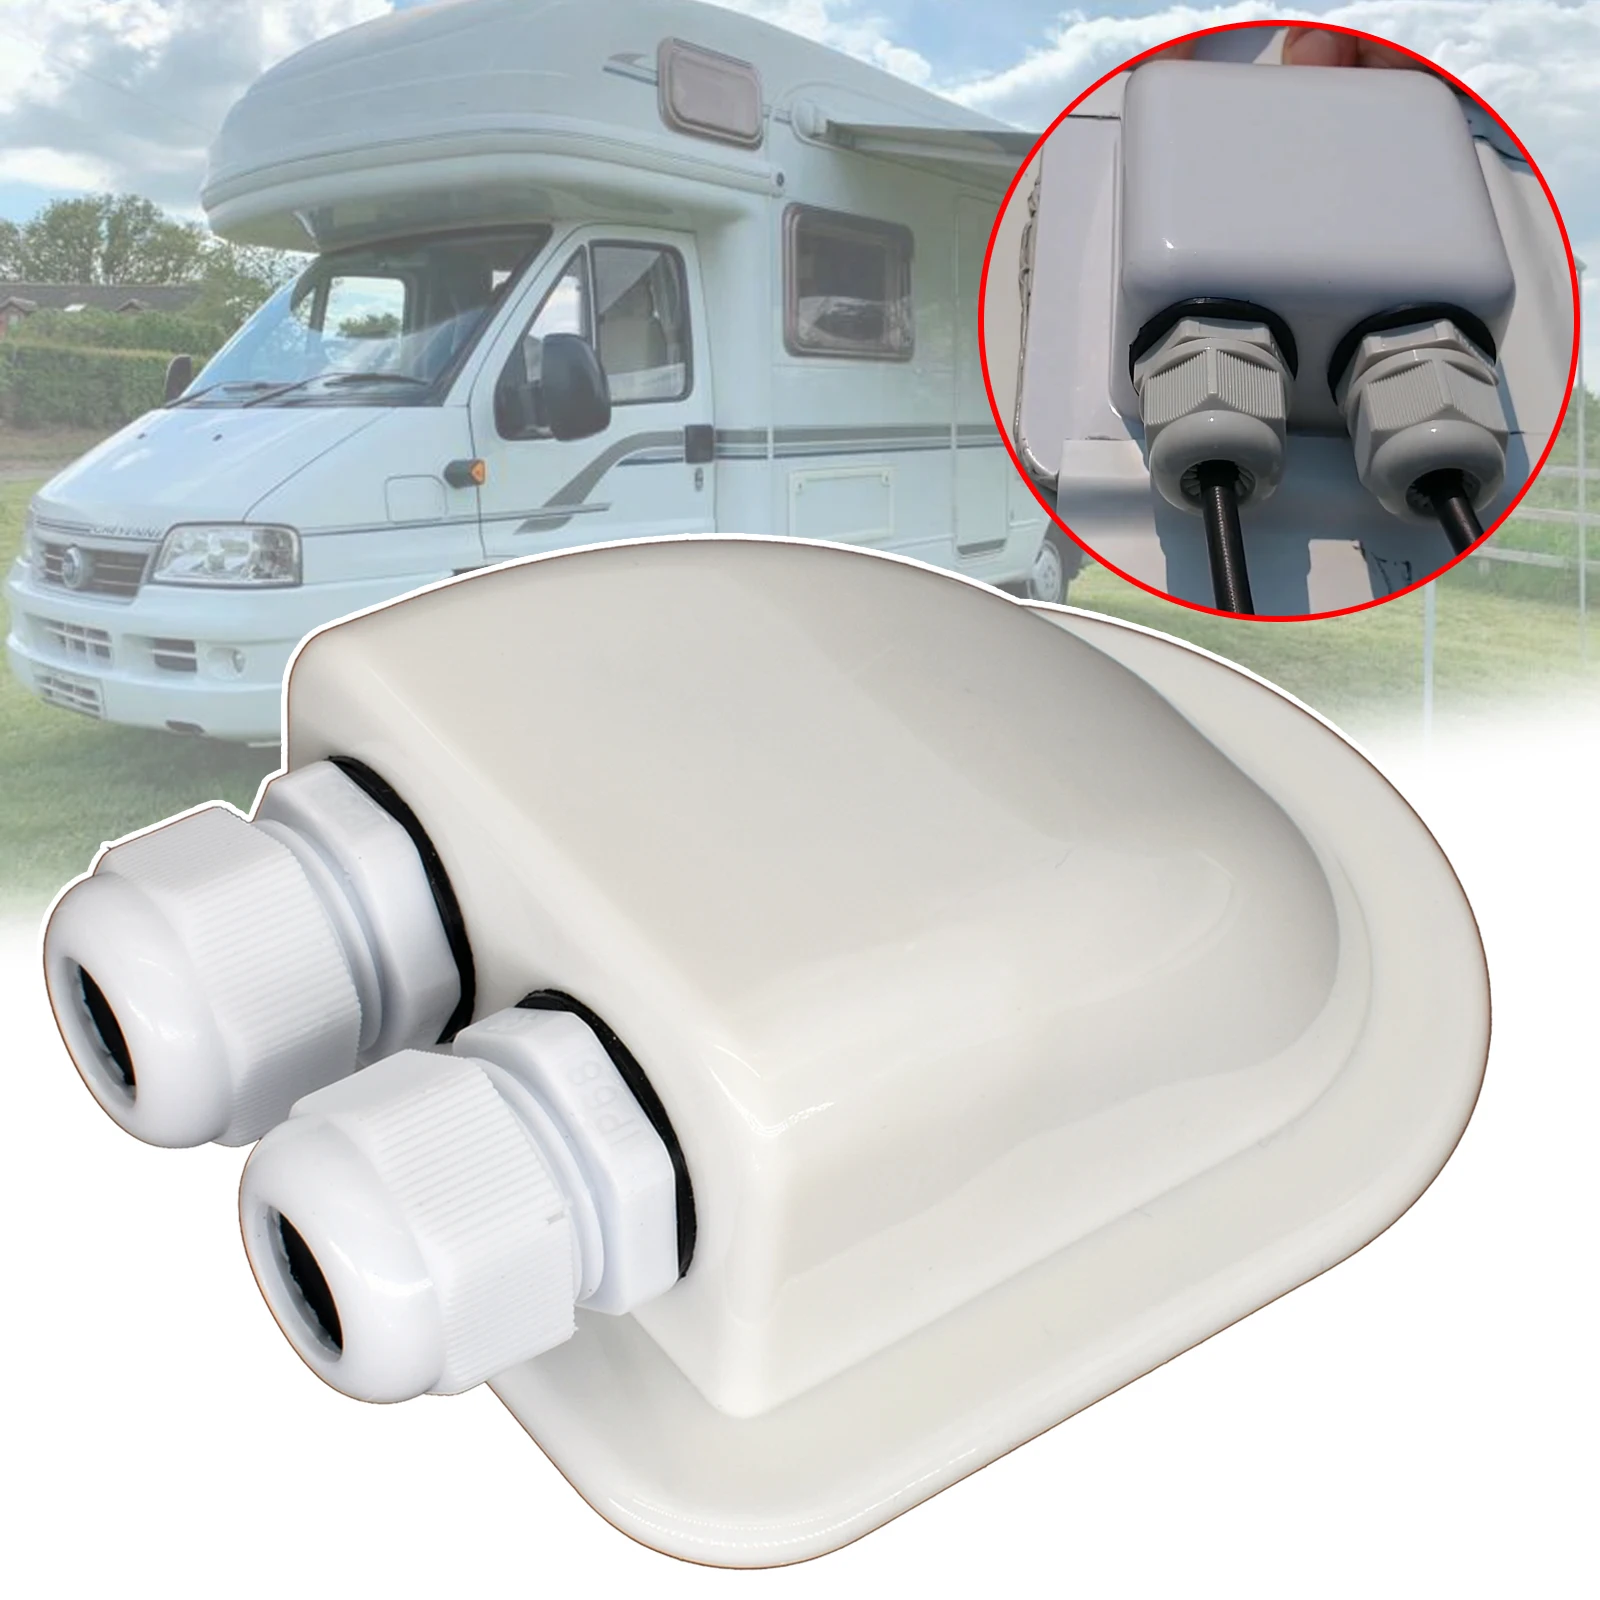 RV Roof Top Junction Box For Solar Panel Wiring Double Hole Cable Entry Gland IP68 Waterproof For RV Yacht Boat Caravan Camper pressure transducer cable pressure transmitter water gas hydraulic sensor 0 1mpa 0 1 6mpa 0 2 5mpa 4 20ma dc24v g1 4 ip68